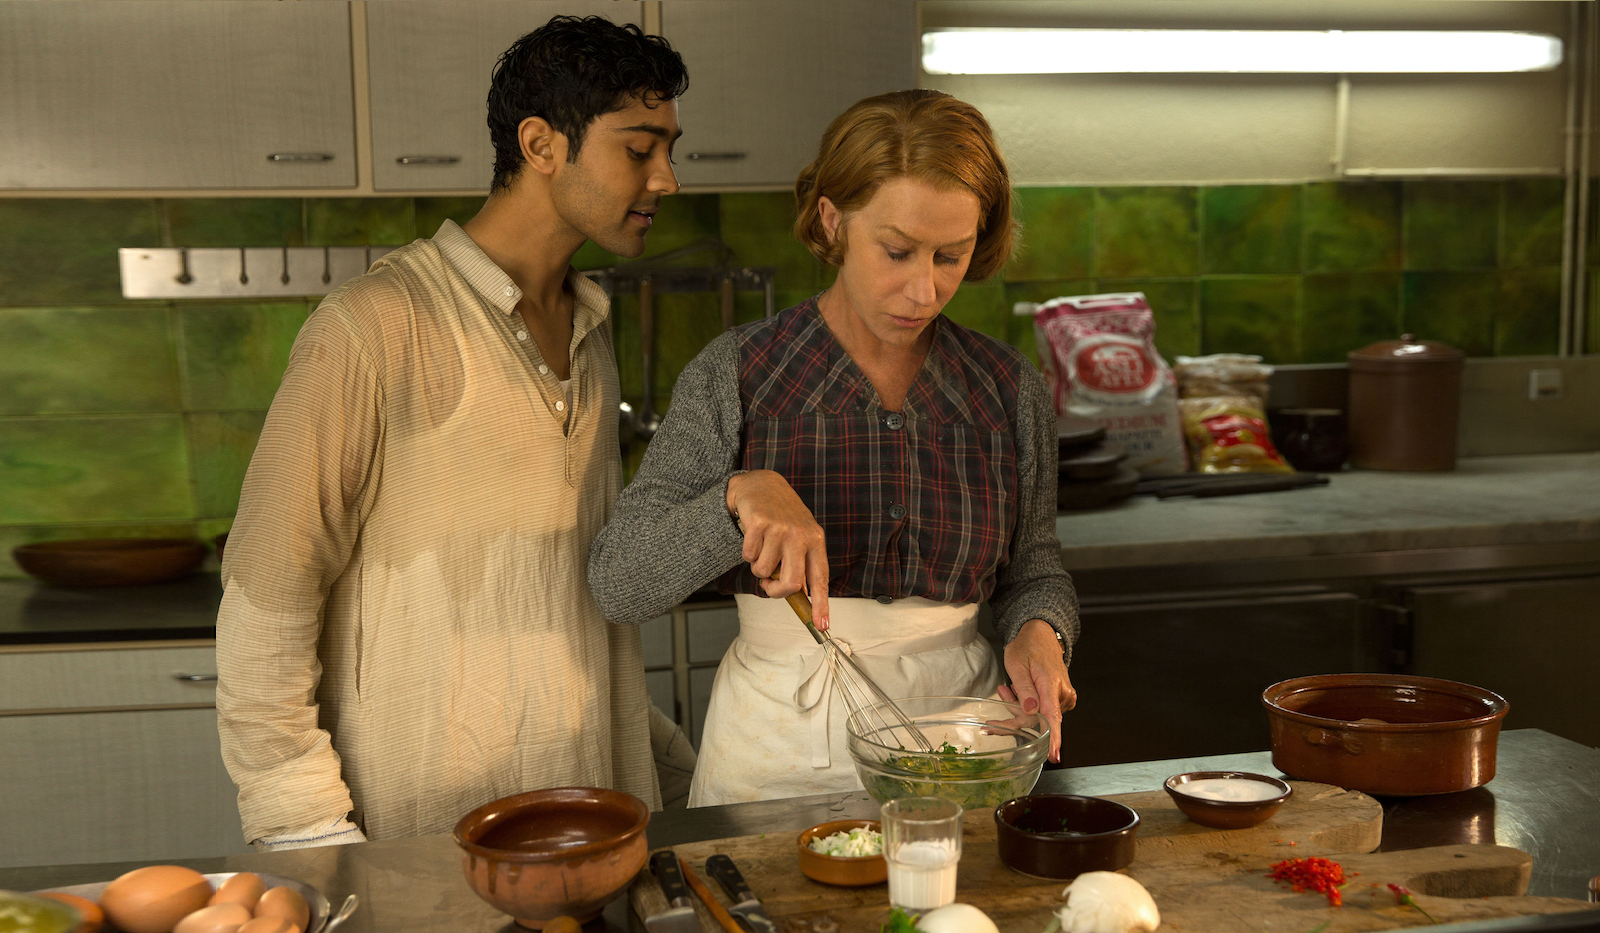 THE HUNDRED-FOOT JOURNEY